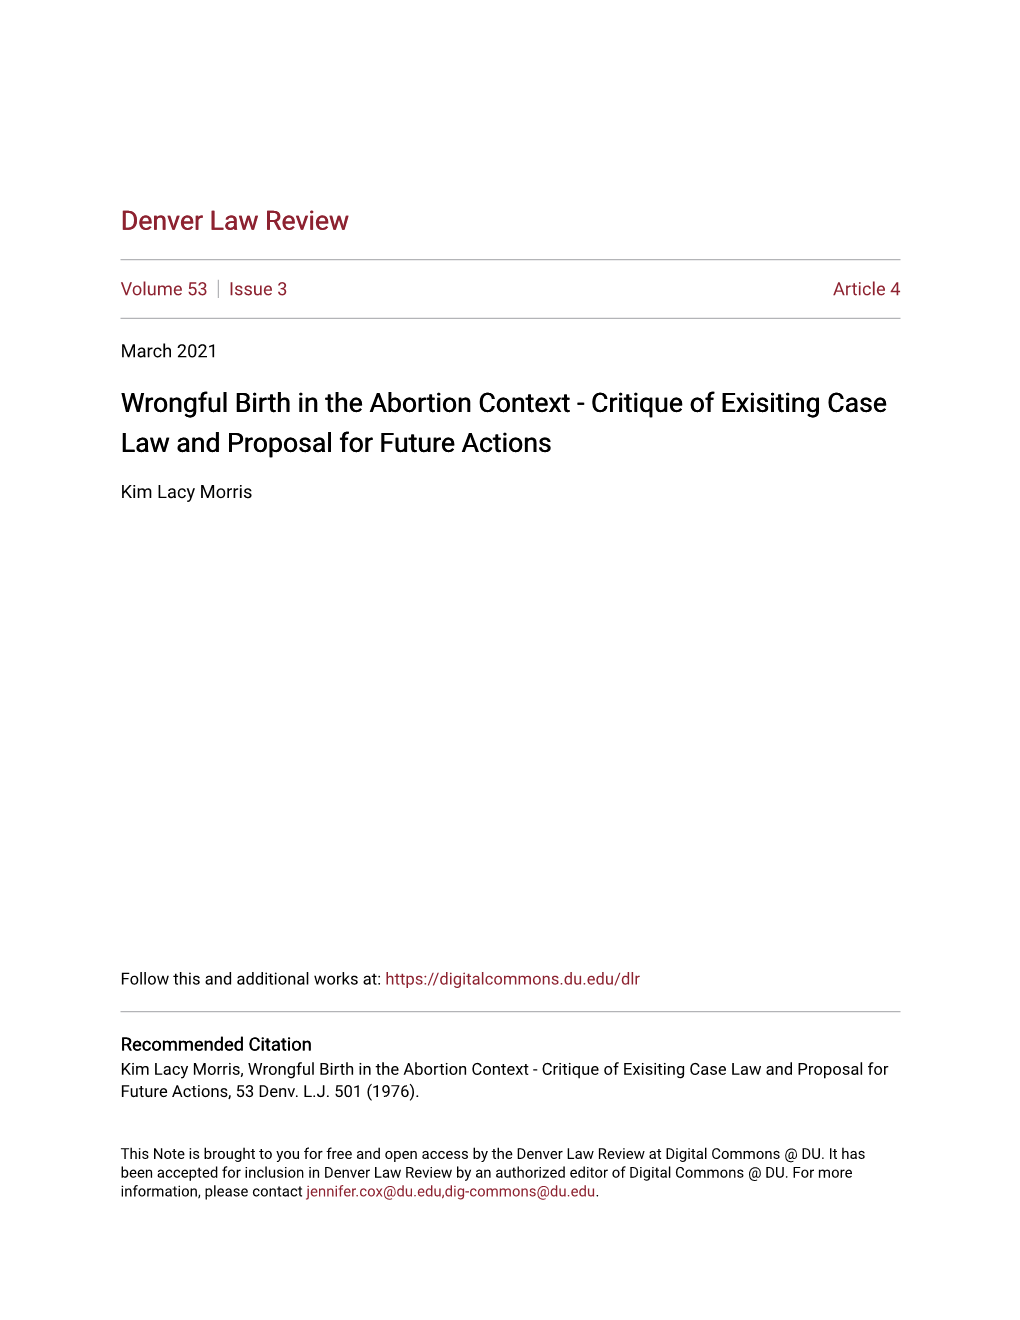 Wrongful Birth in the Abortion Context - Critique of Exisiting Case Law and Proposal for Future Actions